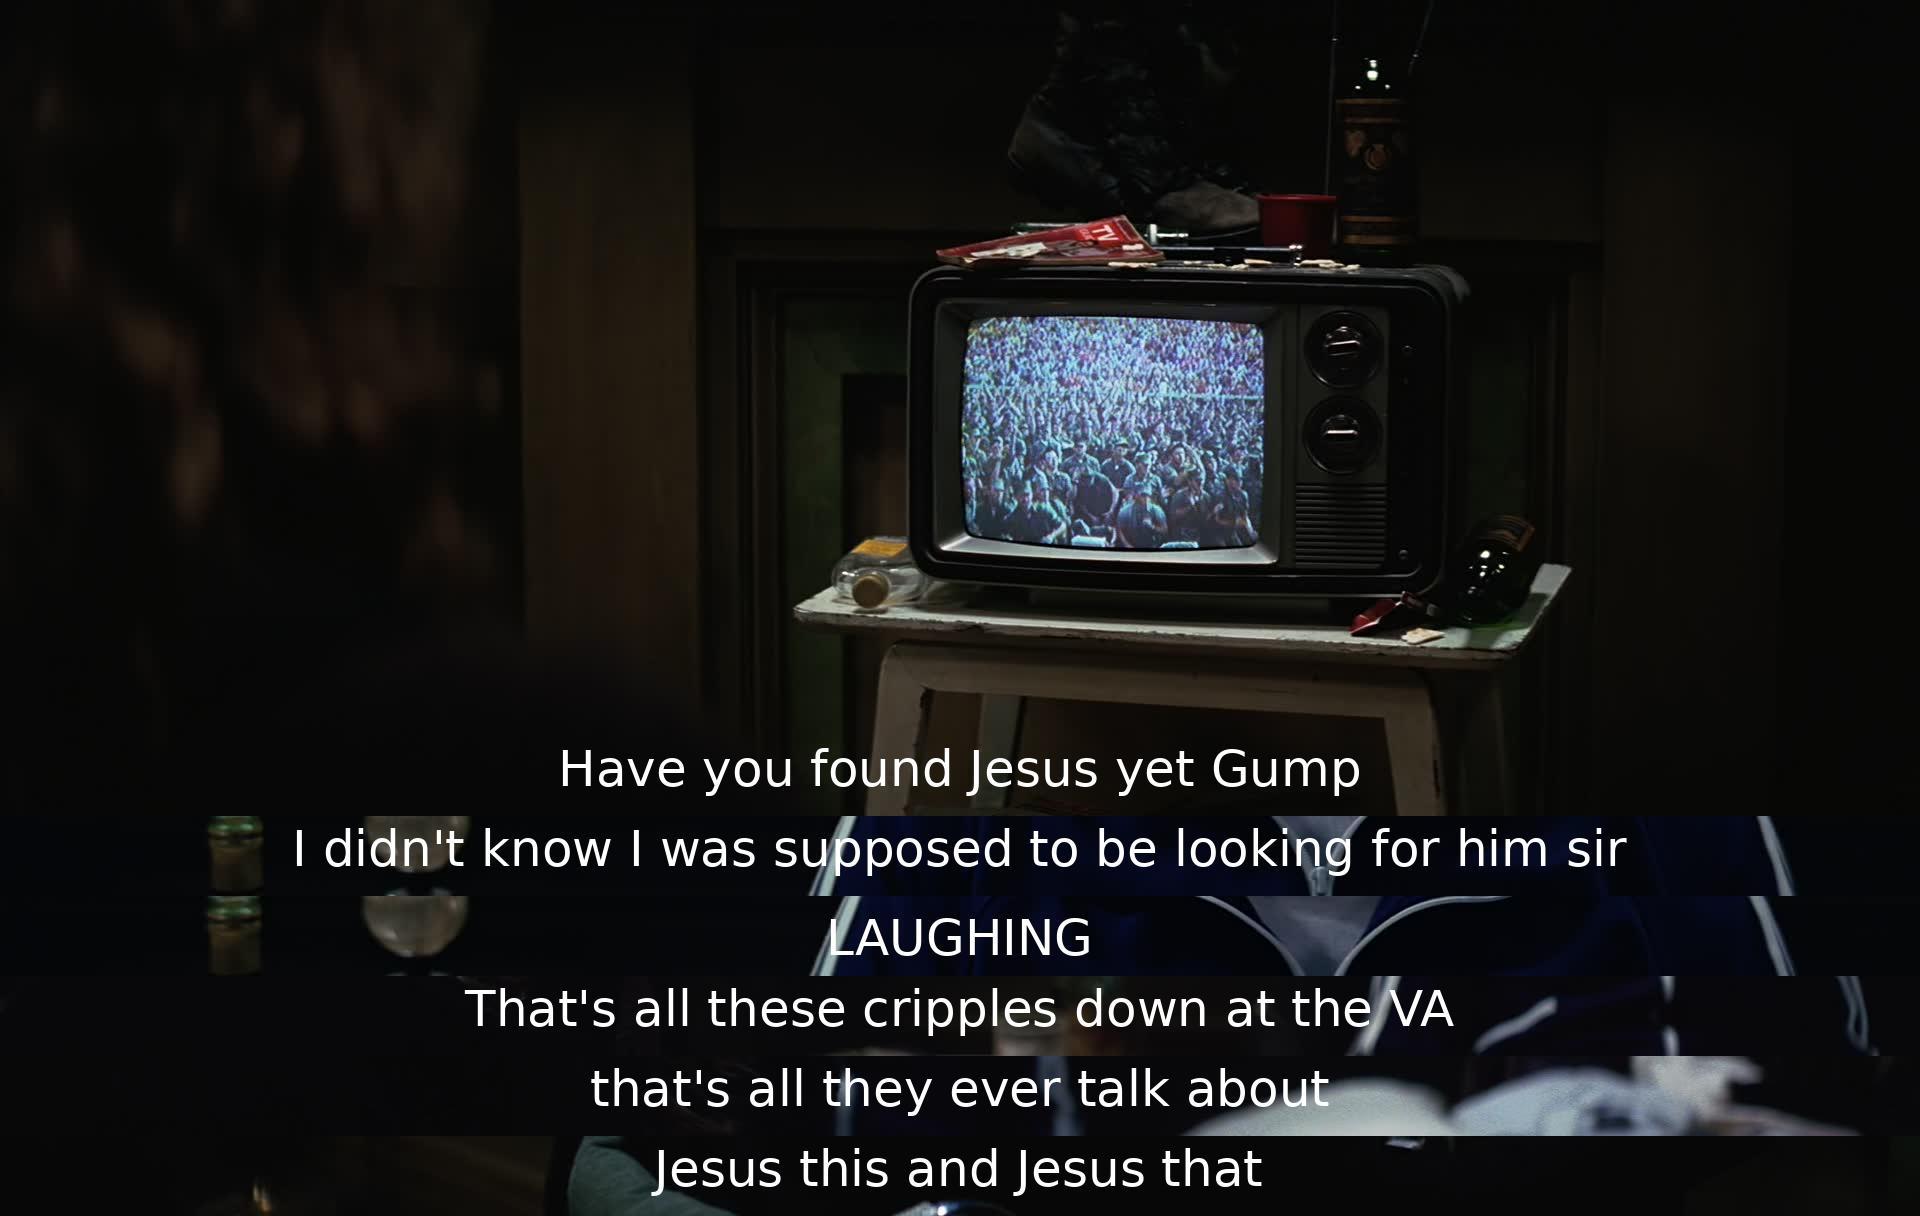 A man asks Gump if he has found Jesus, but Gump replies that he didn't know he was supposed to be looking for him. The man laughs and mentions how others at the VA constantly talk about Jesus, indicating the prevalence of faith discussions among them.